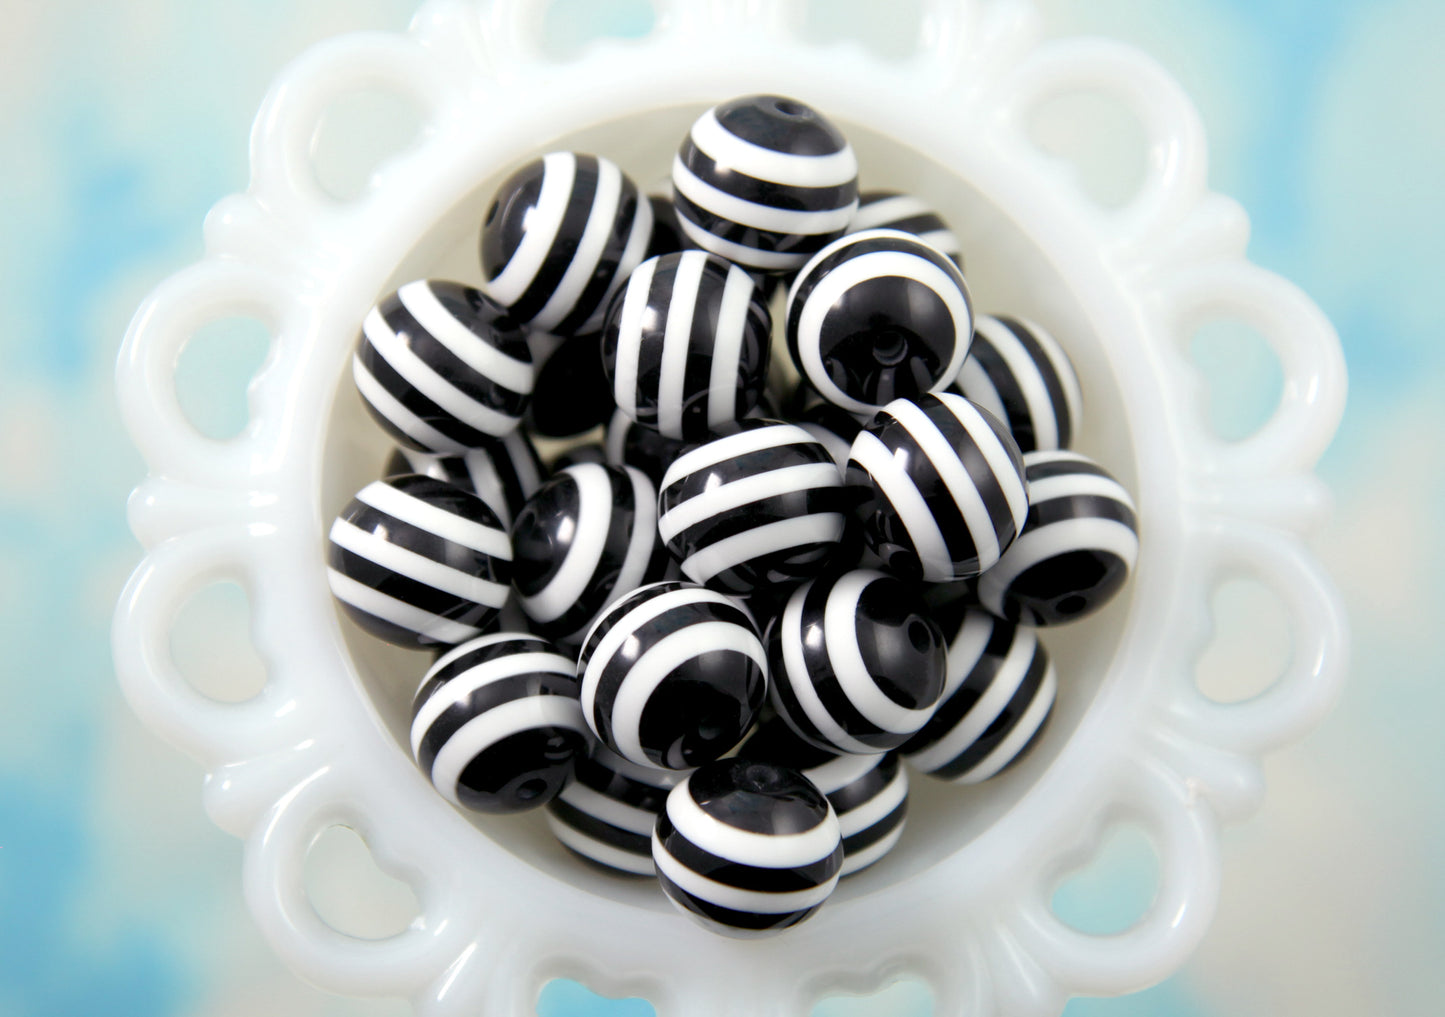 Chunky Striped Resin Beads - 20mm Black and White Chunky Stripe Gumball Bubblegum Acrylic or Resin Beads - 8 pc set